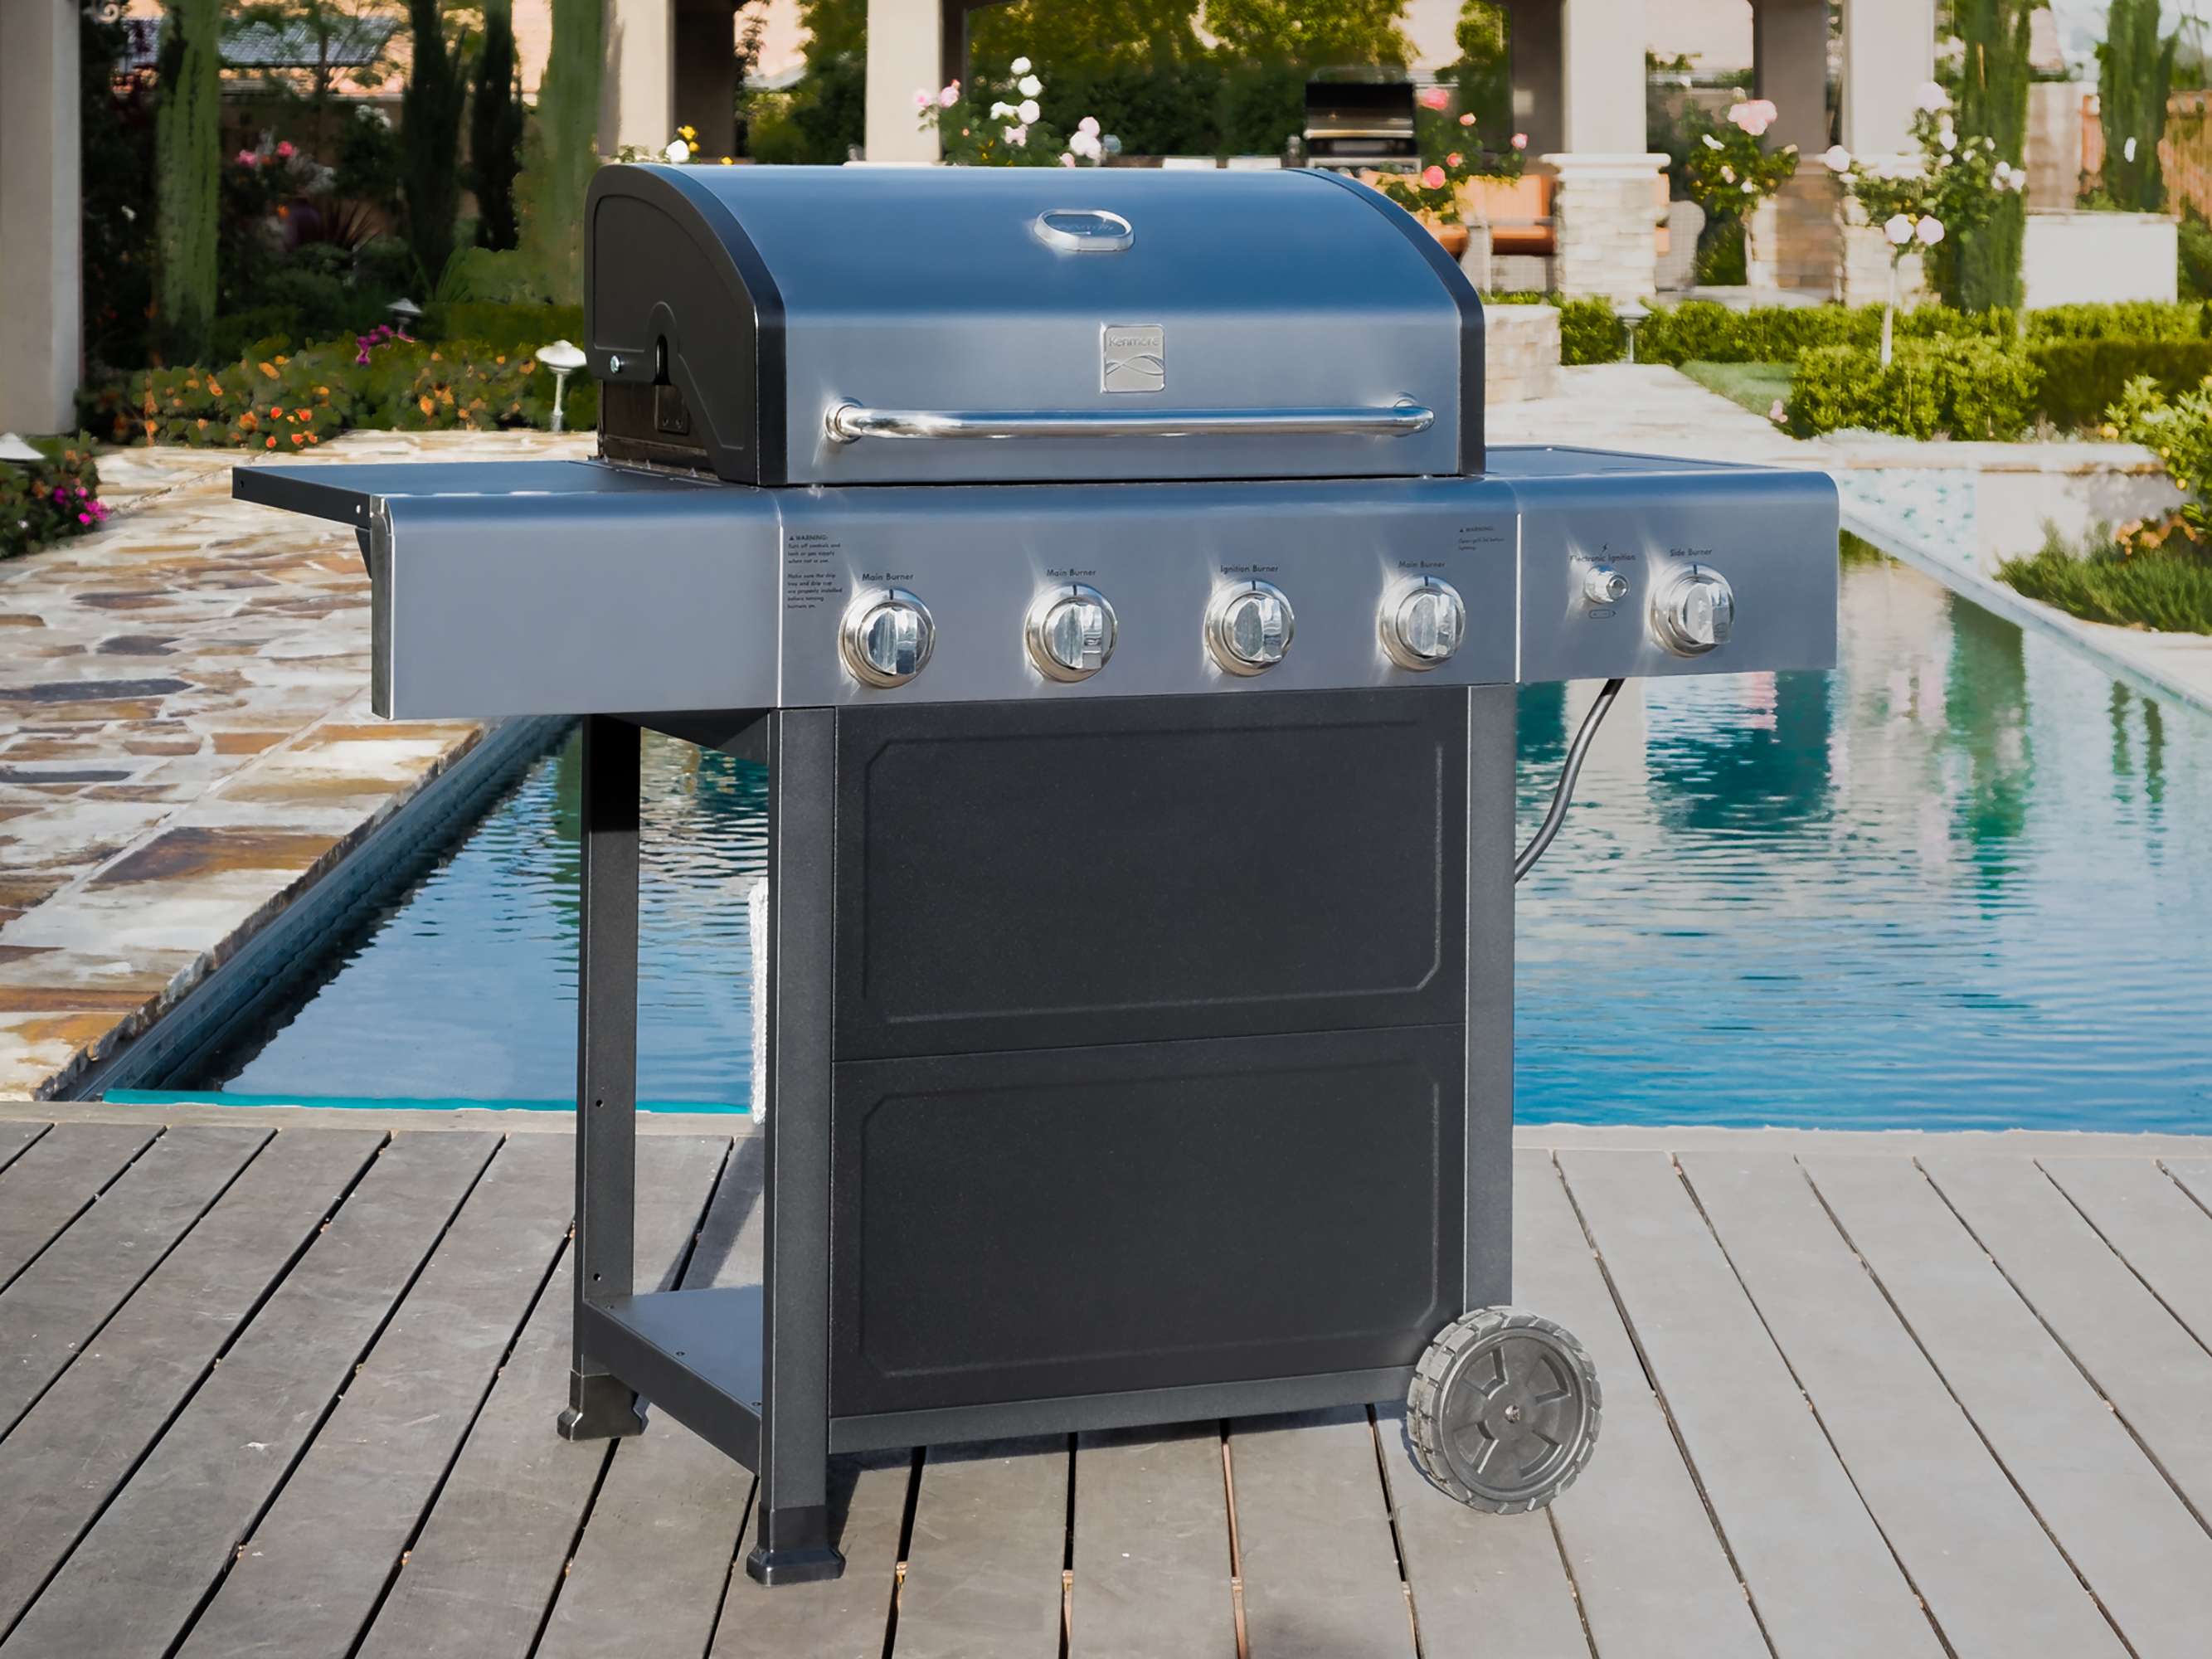 Kenmore 4-Burner Outdoor Propane Gas Grill with Side Burner, Open Cart, Stainless Steel/Black - image 5 of 9